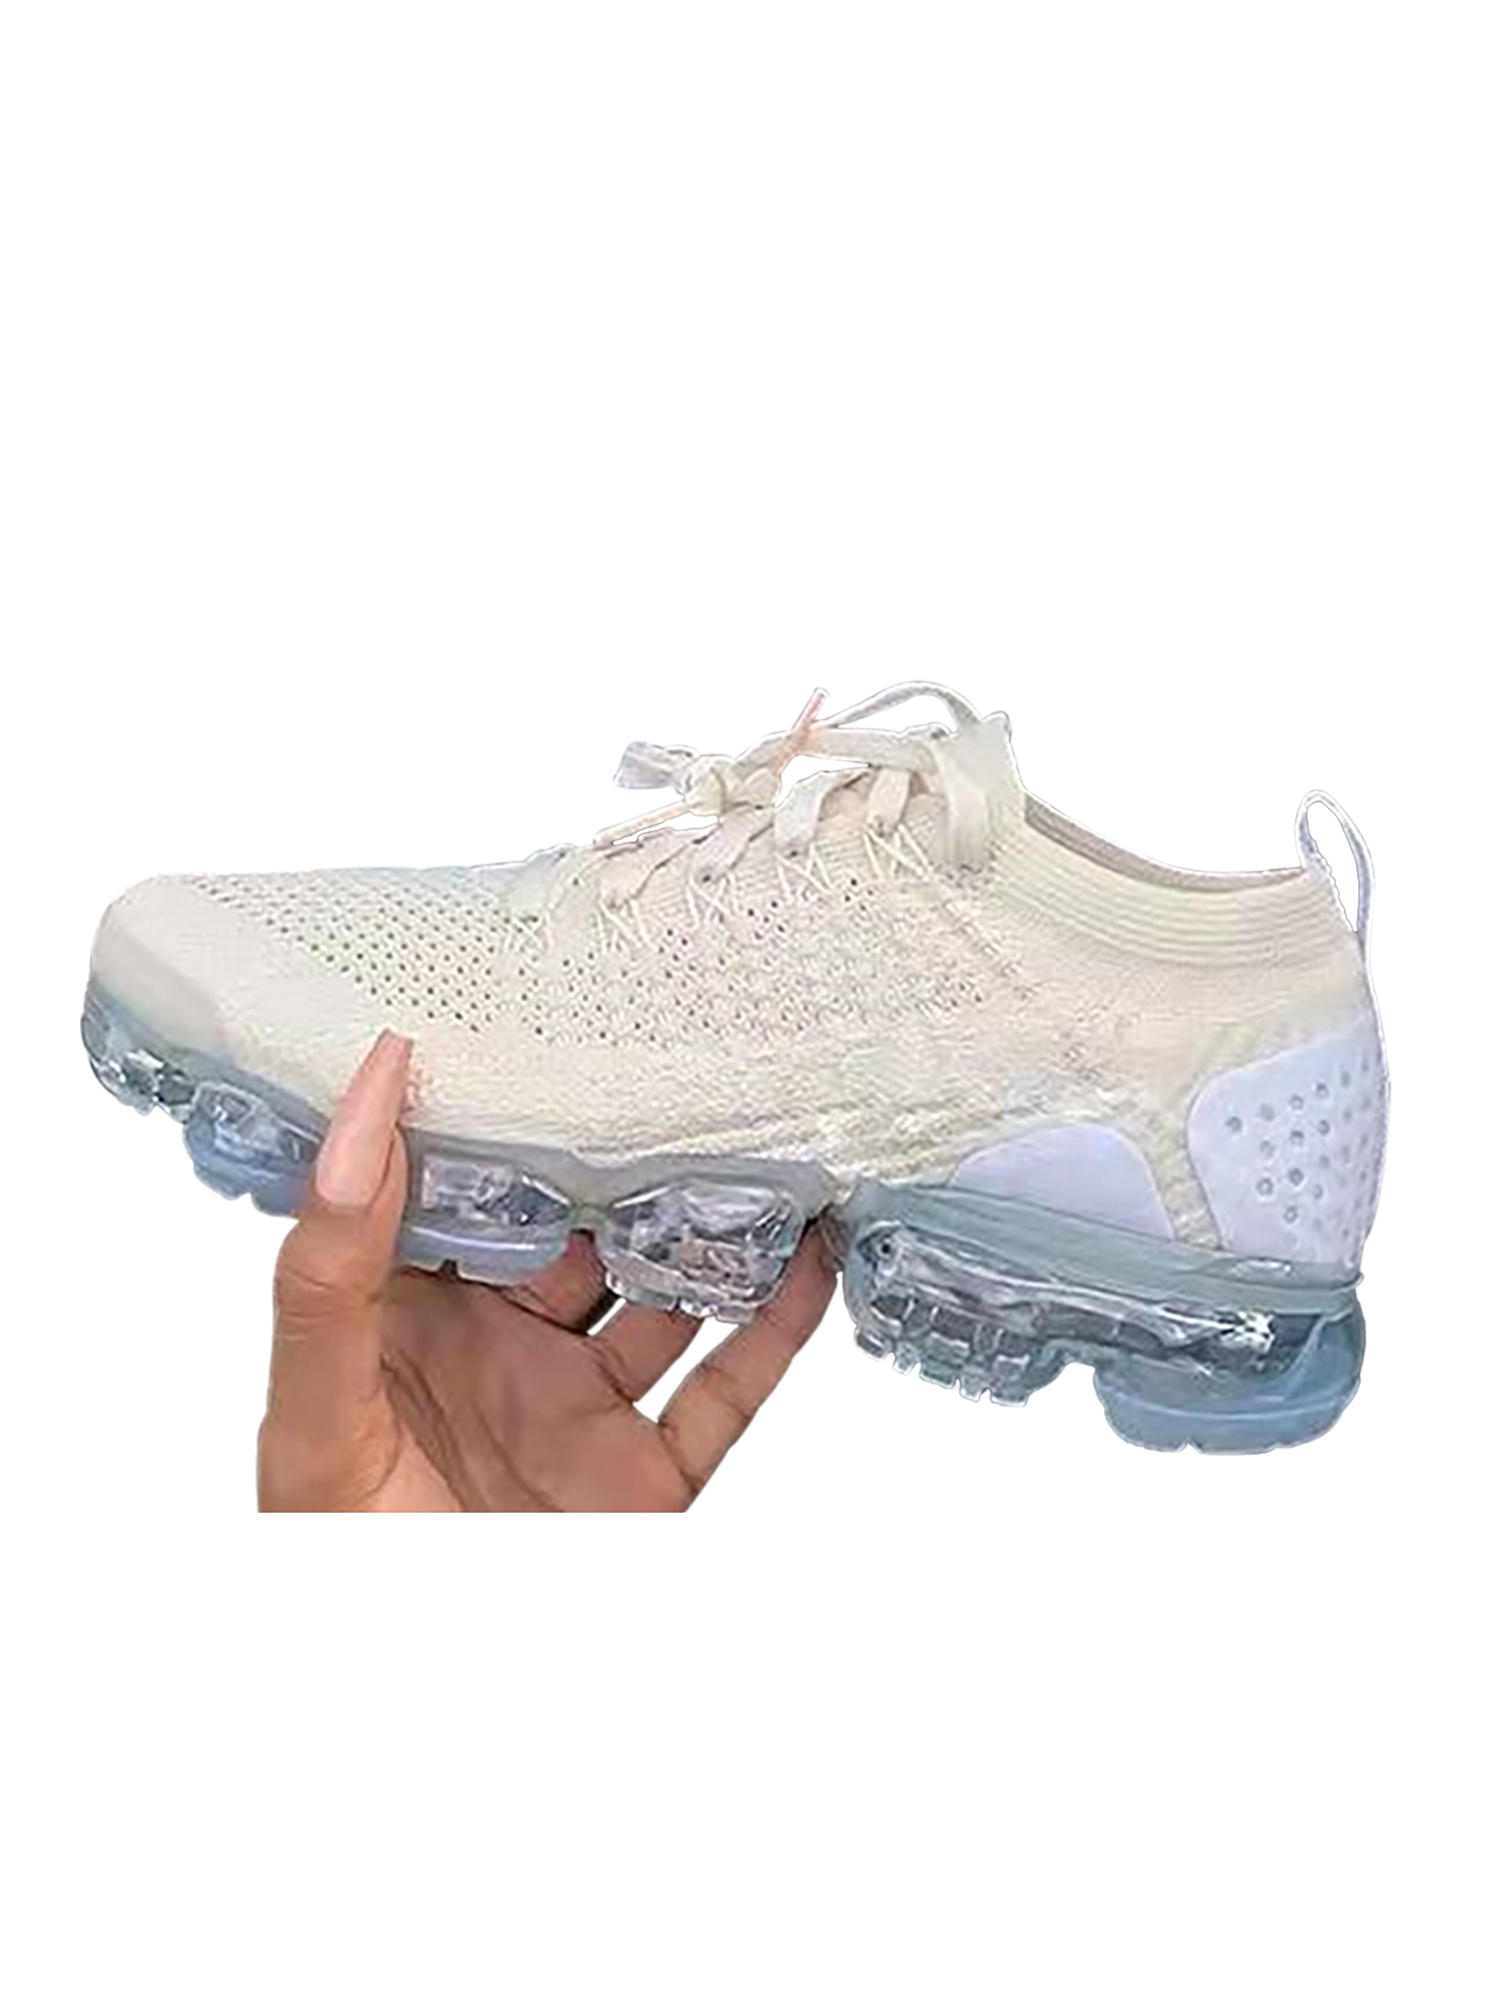 Details about  / Womens Running Athletic Sneakers Canvas Sports Casual Breathable Shoes Fashion